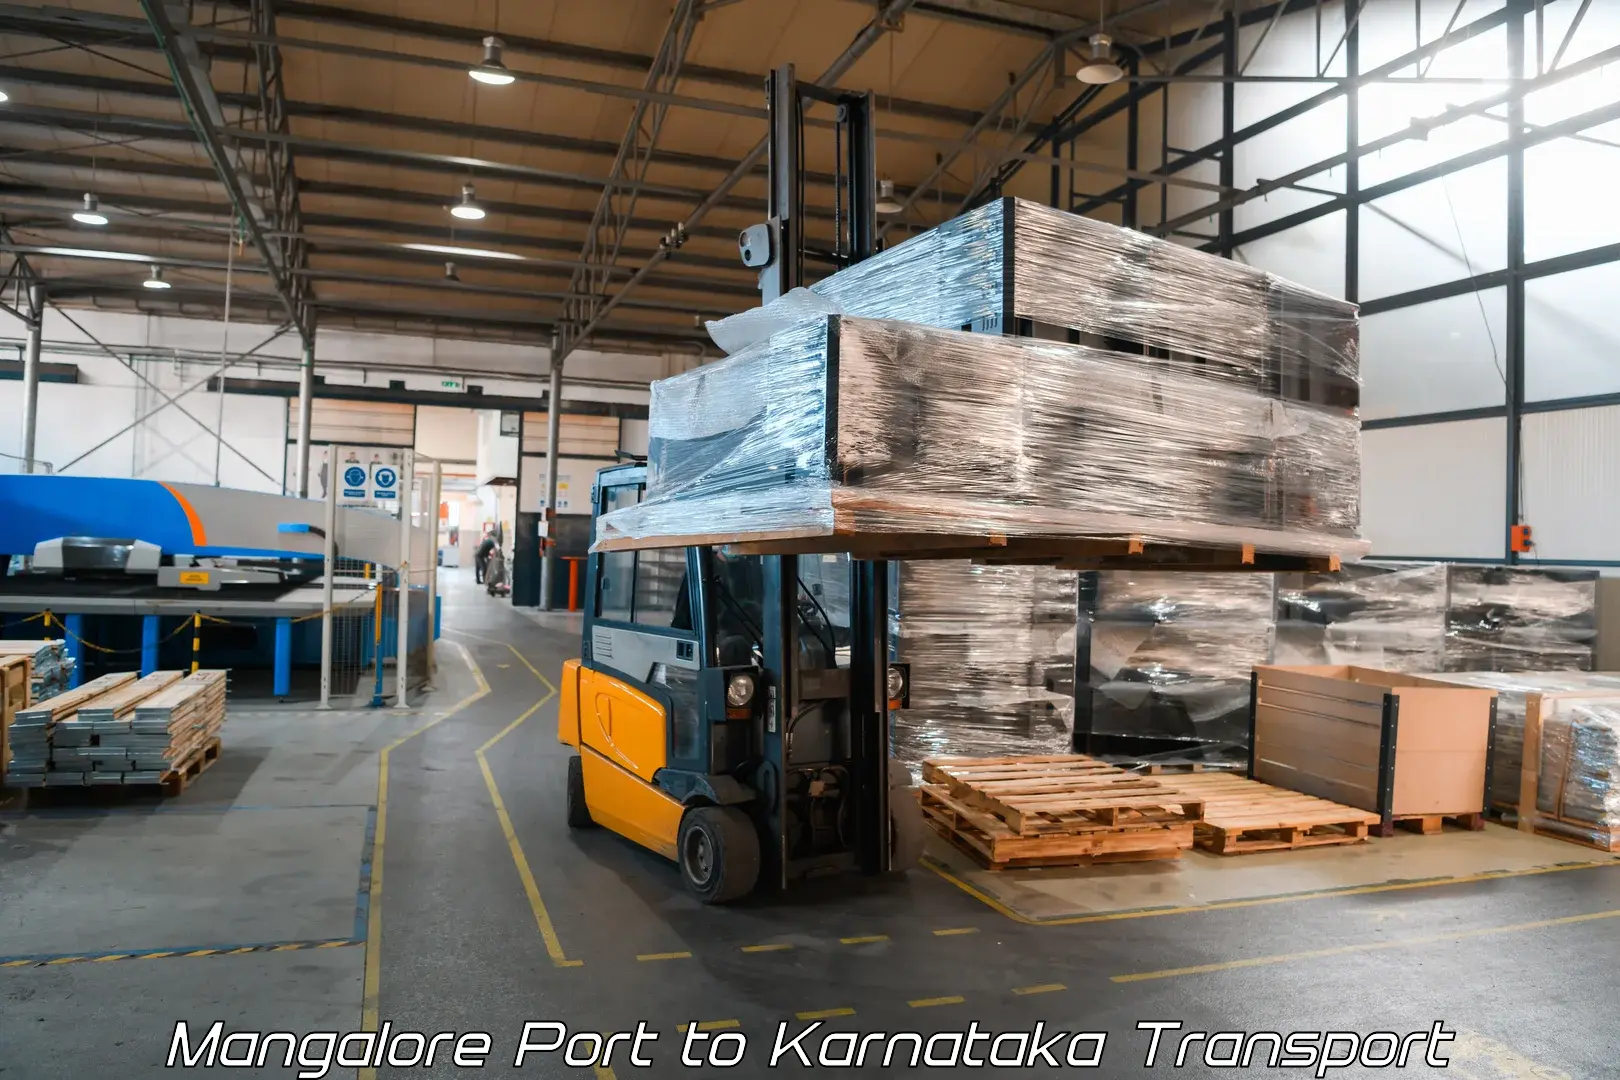 Commercial transport service Mangalore Port to Chittapur